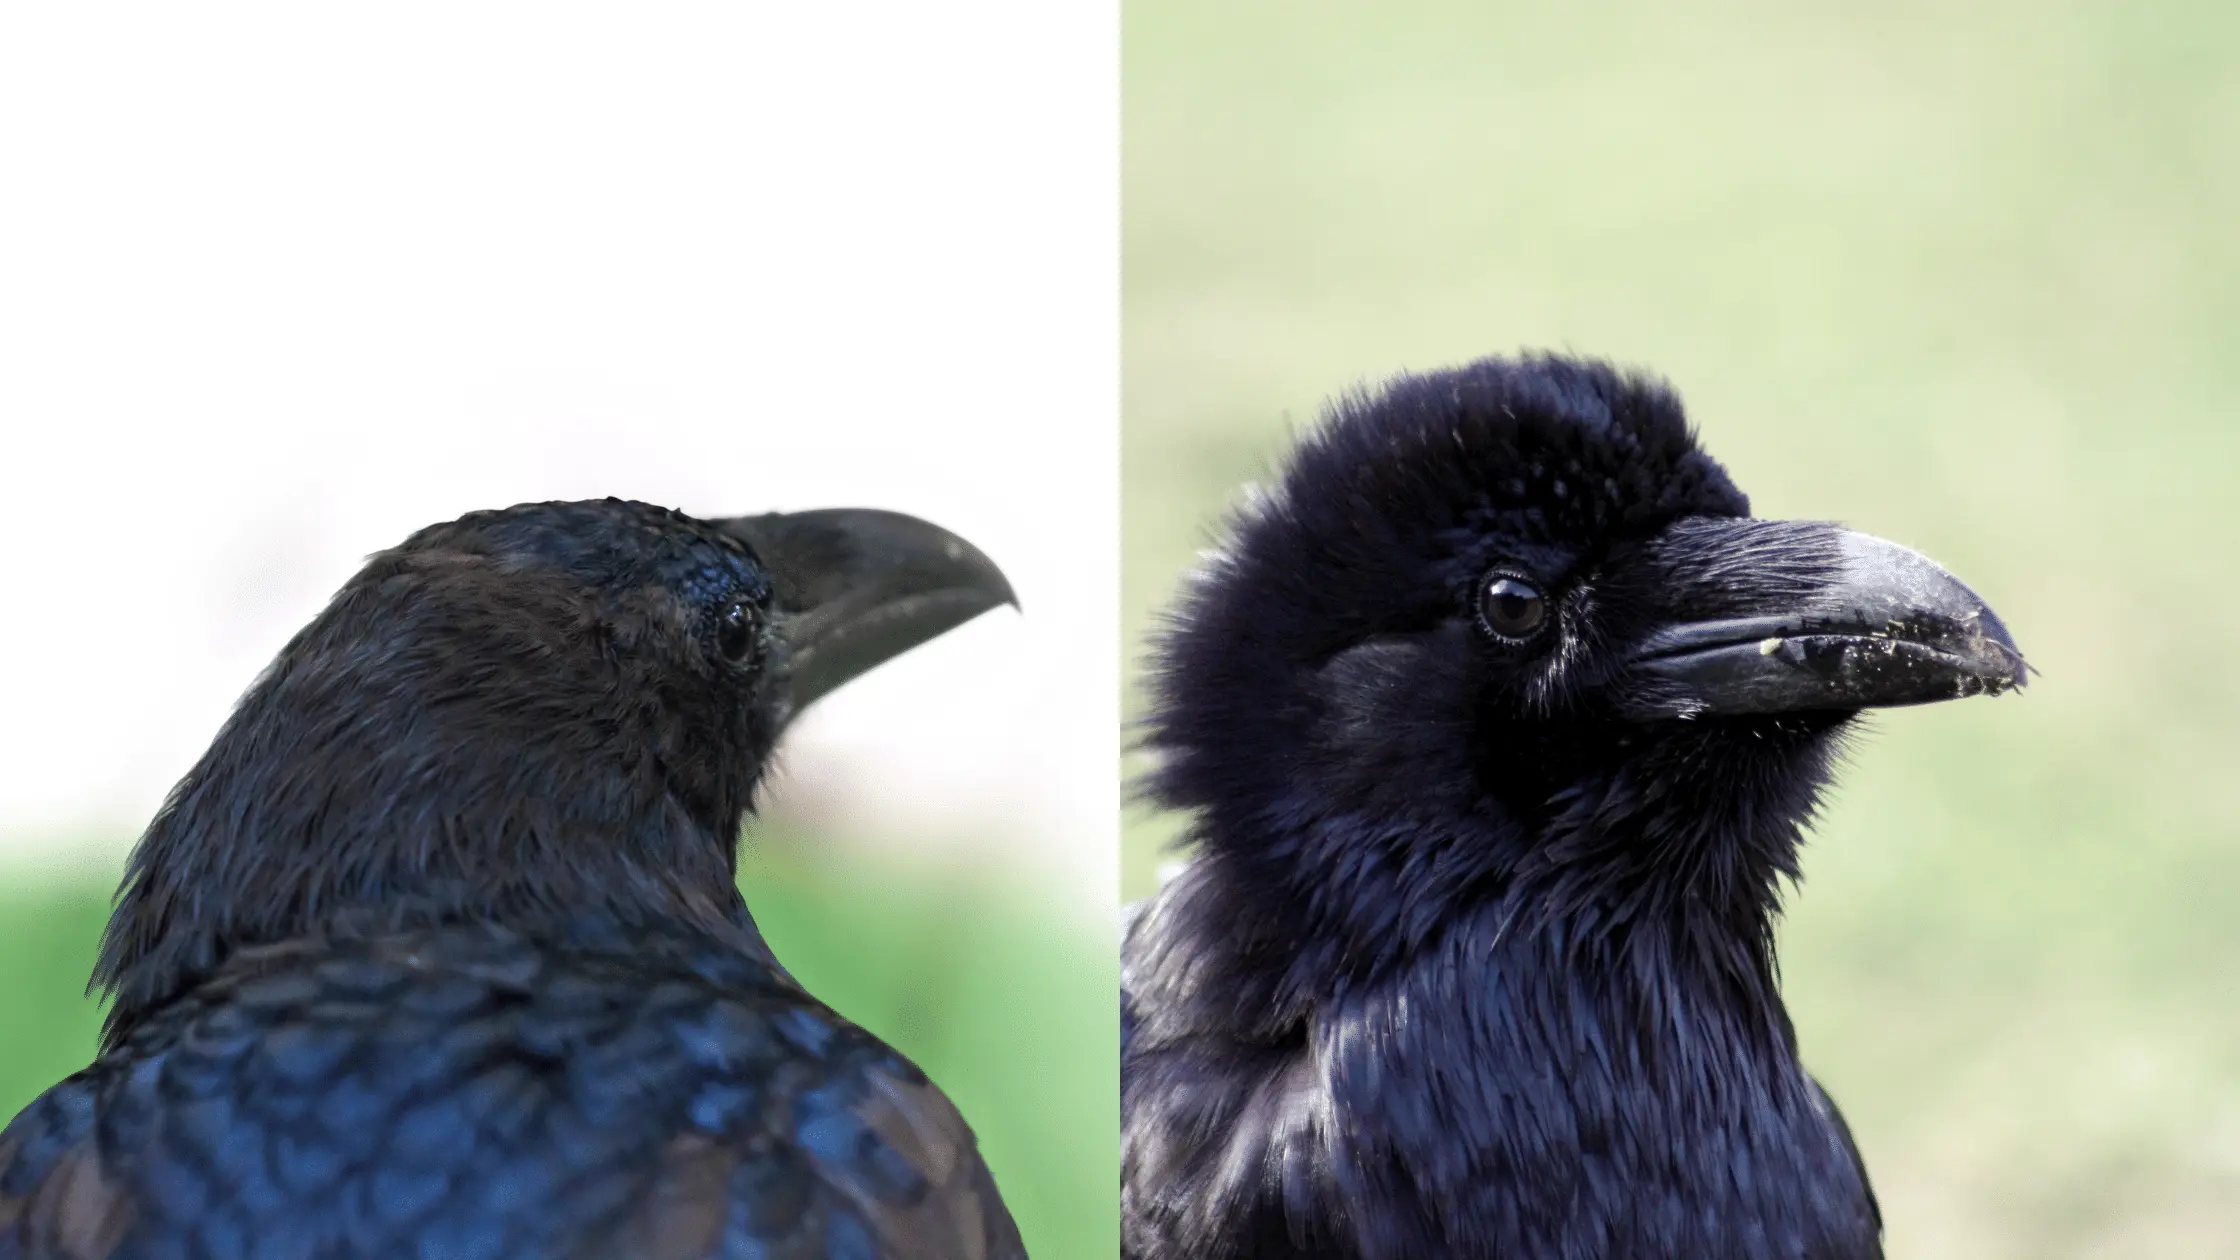 The Heads of a Raven and Crow